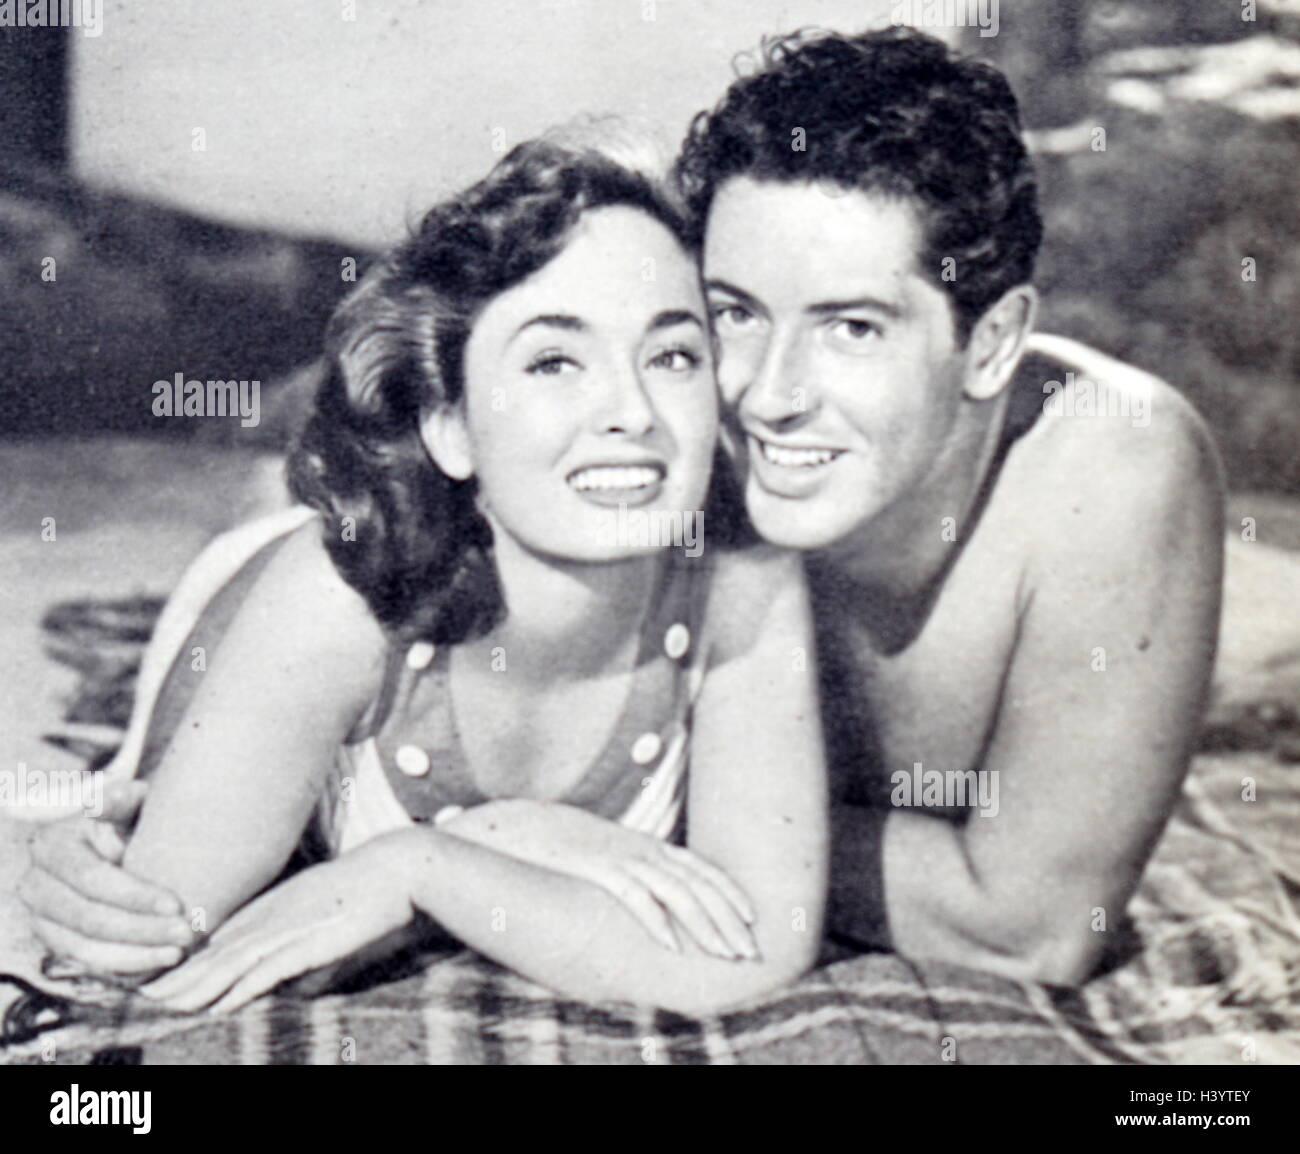 Film still from 'Our Very Own' starring Ann Blyth and Farley Granger. Dated 20th Century Stock Photo